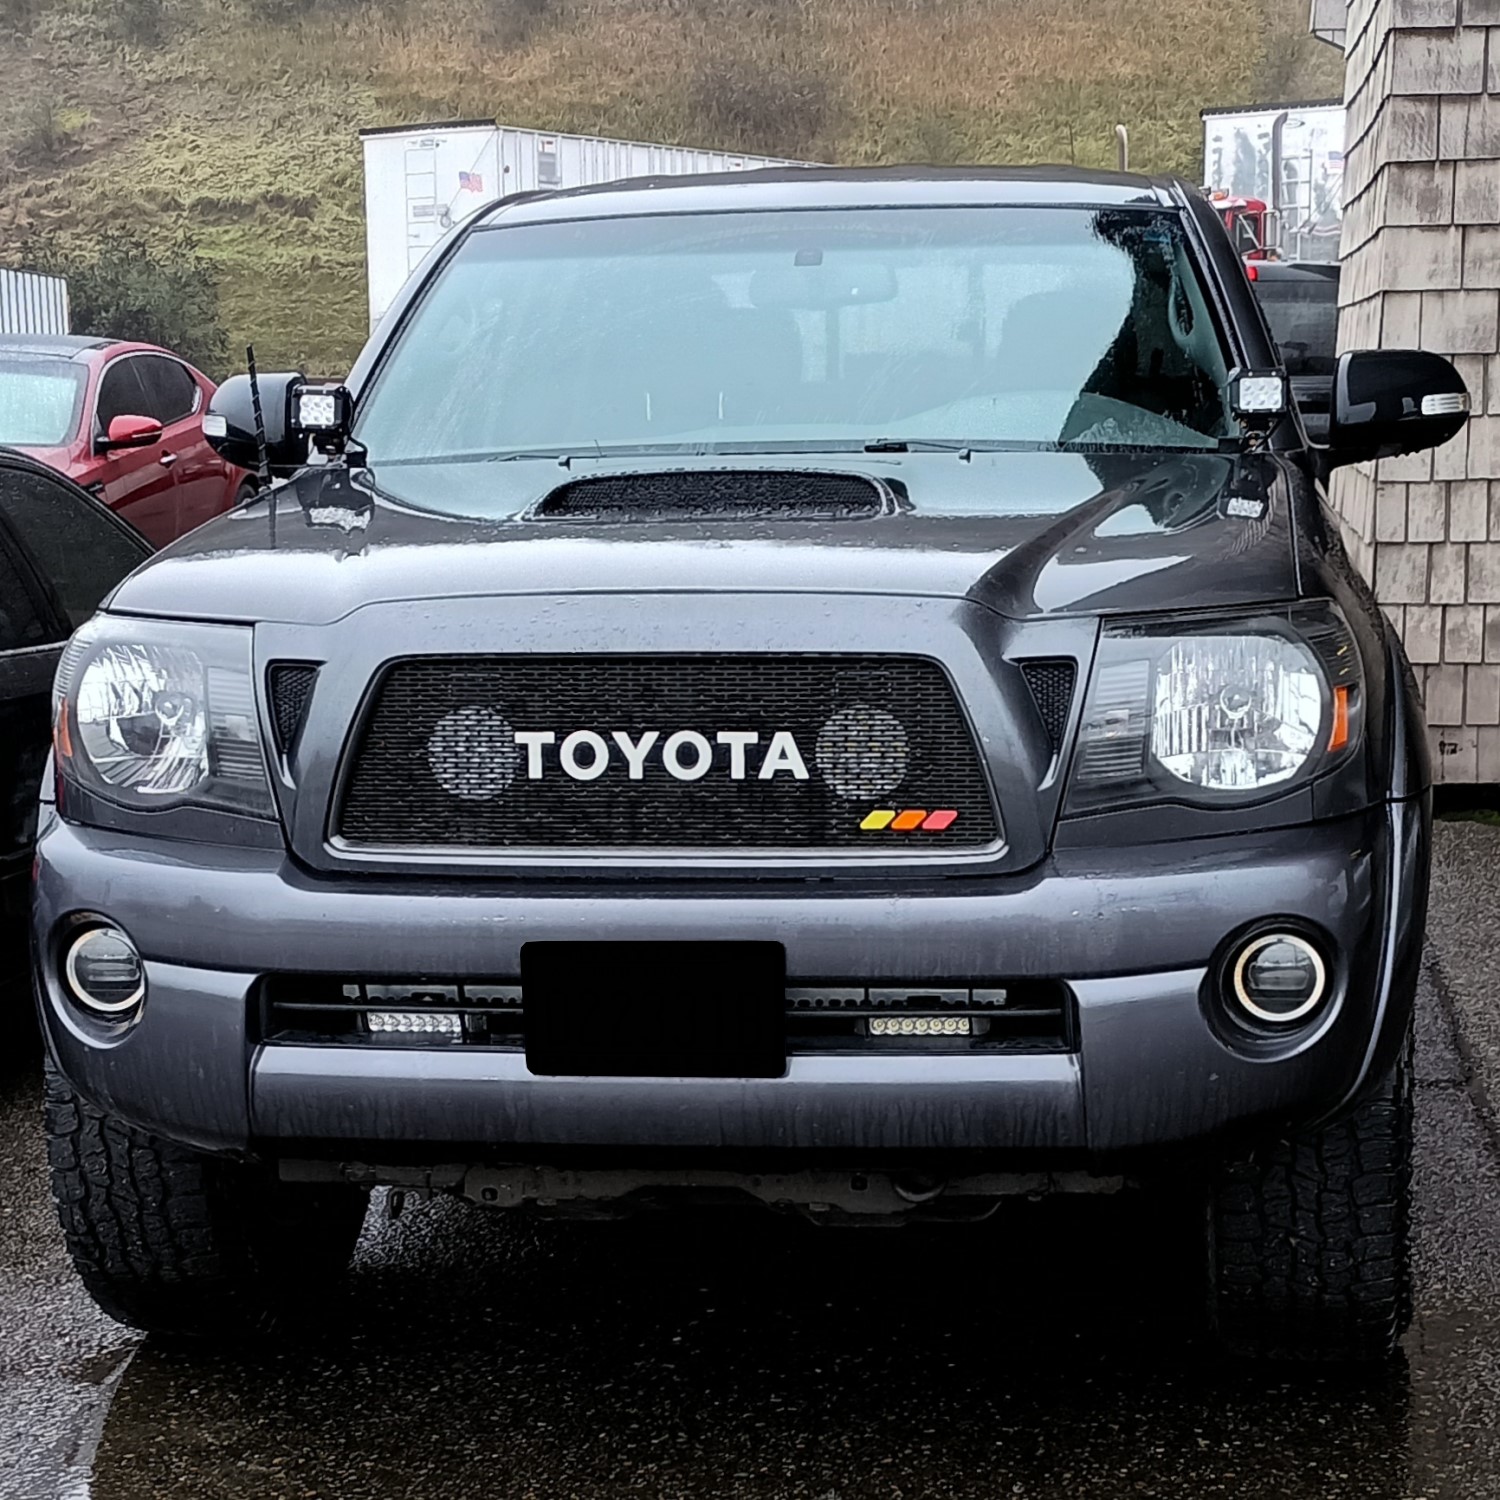 Seeing Double with 2005-10 Tacoma Grille Build, One with Grille with Two Emblems and Three Colors